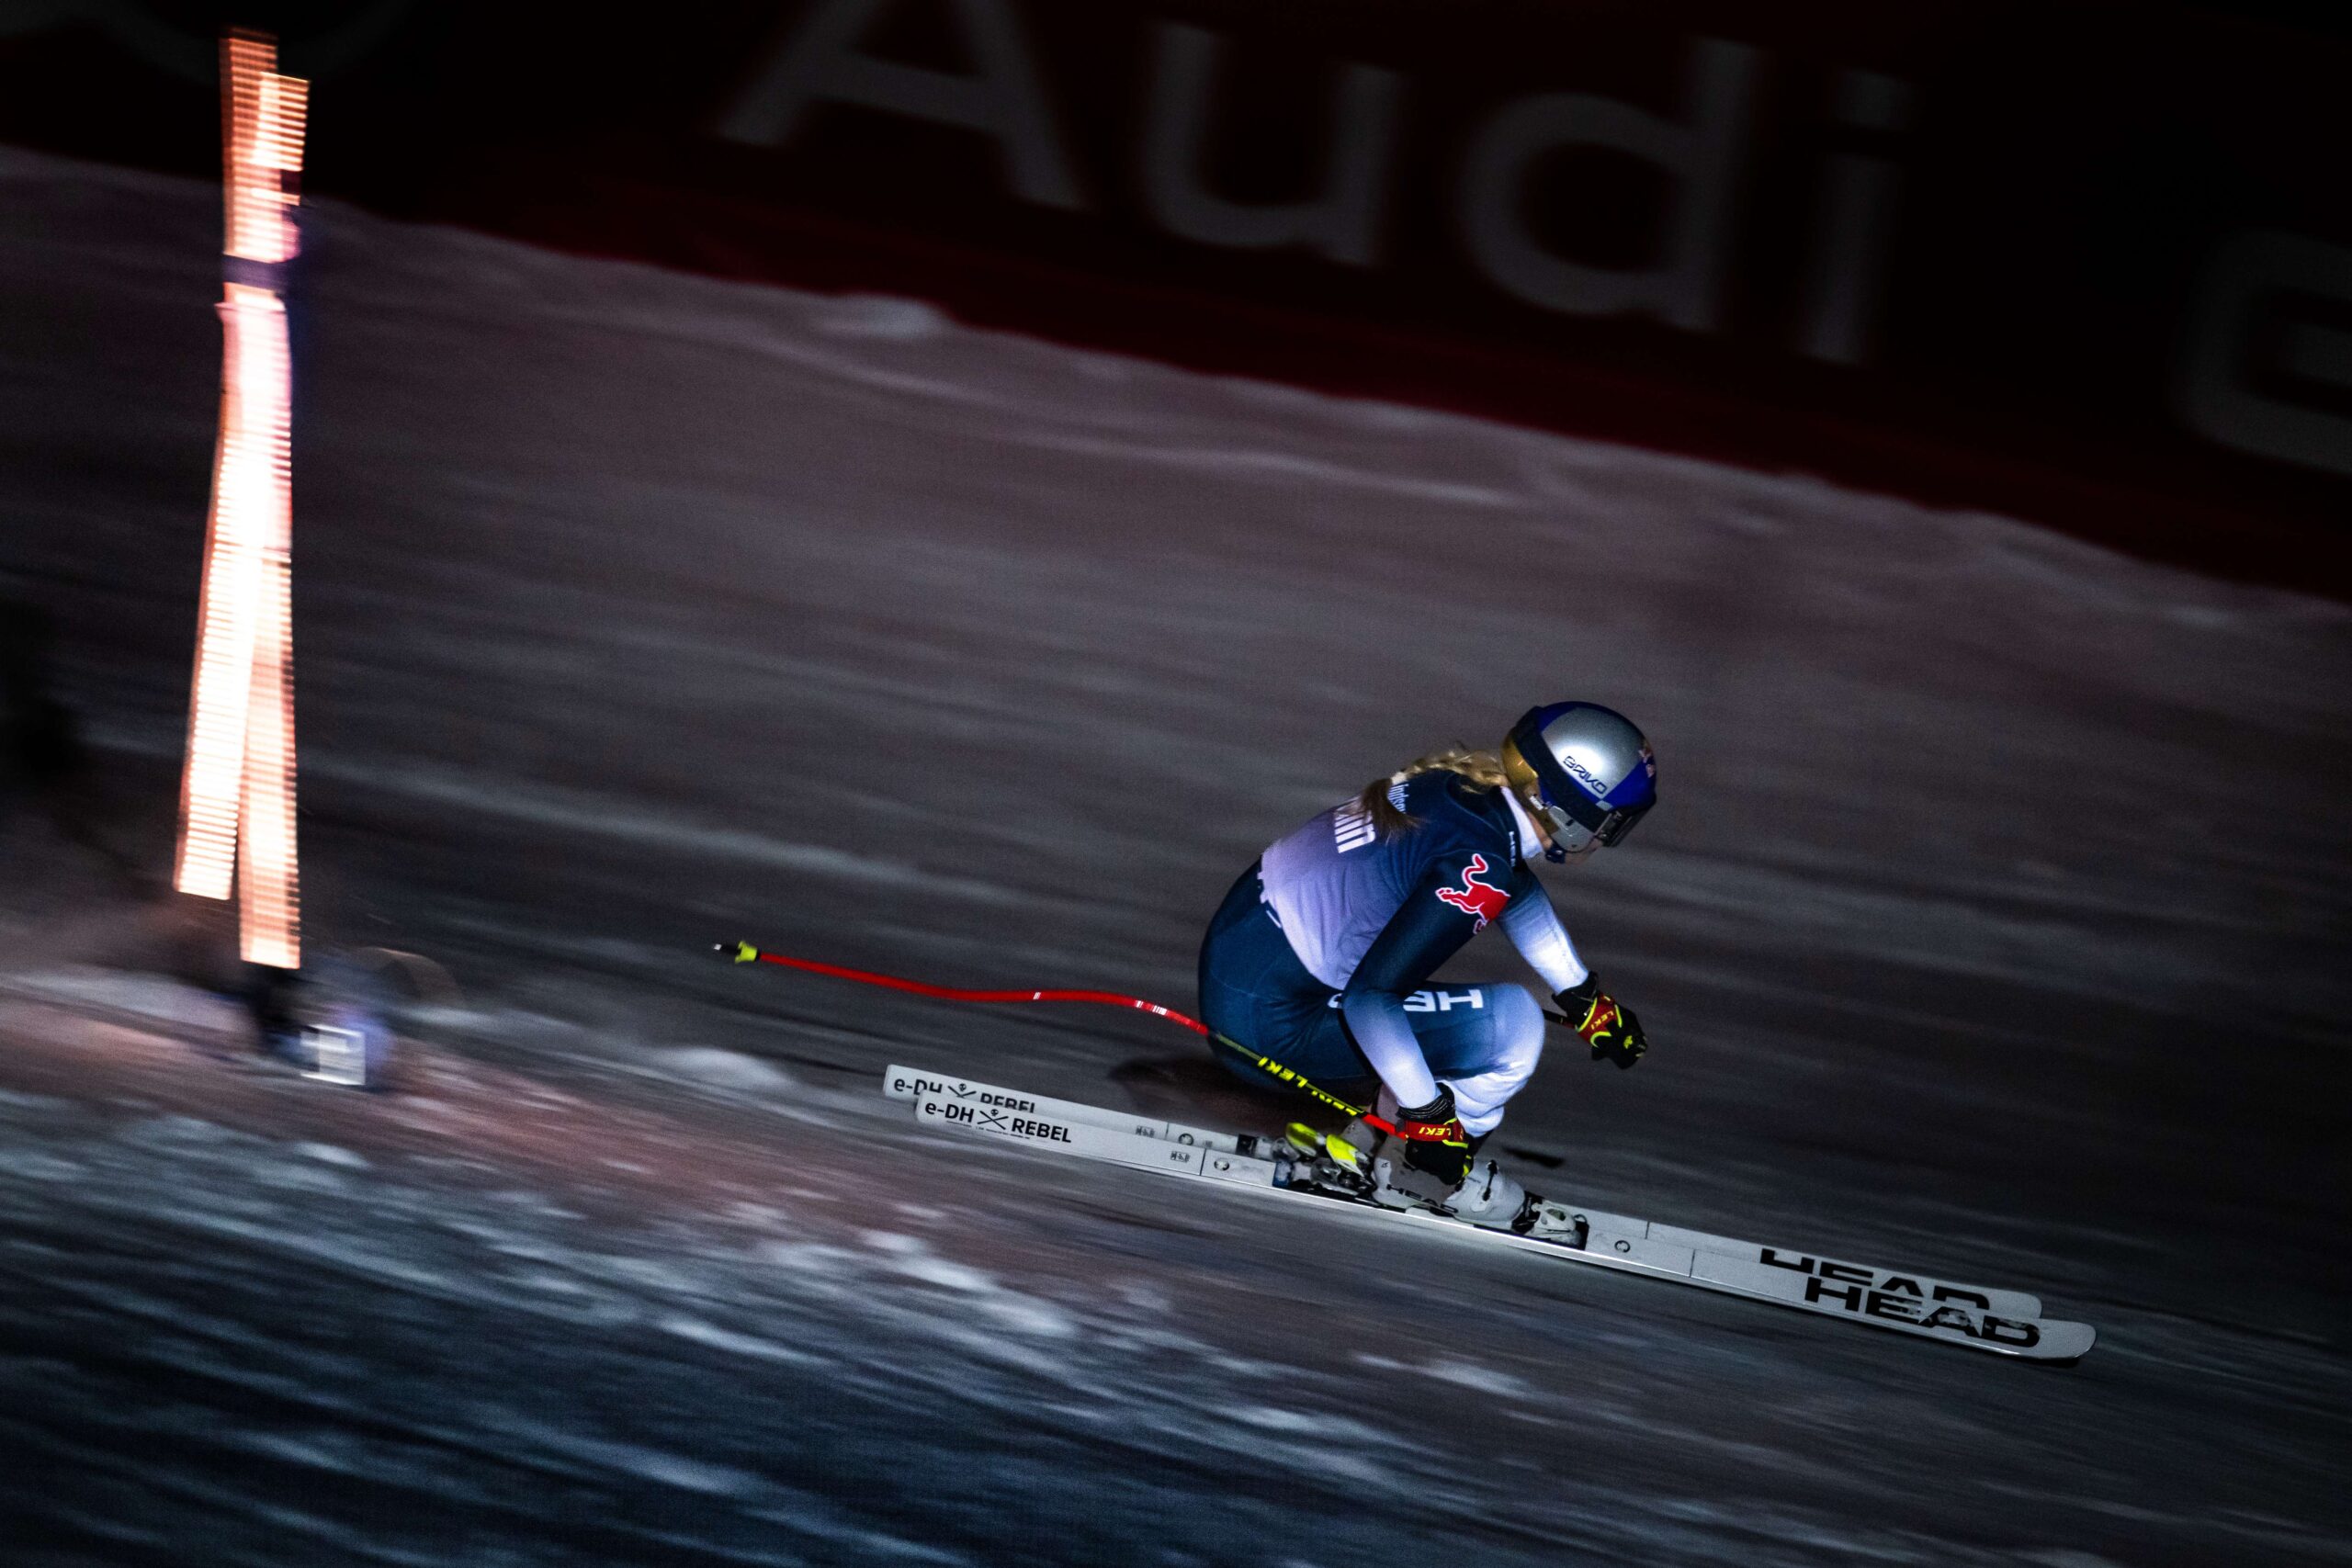 retired ski racer lindsey vonn on downhill skis wears red bull branded race gear on a course in kitzbuhel. it's dark, at night, and the skier is tucked, making a turn in air